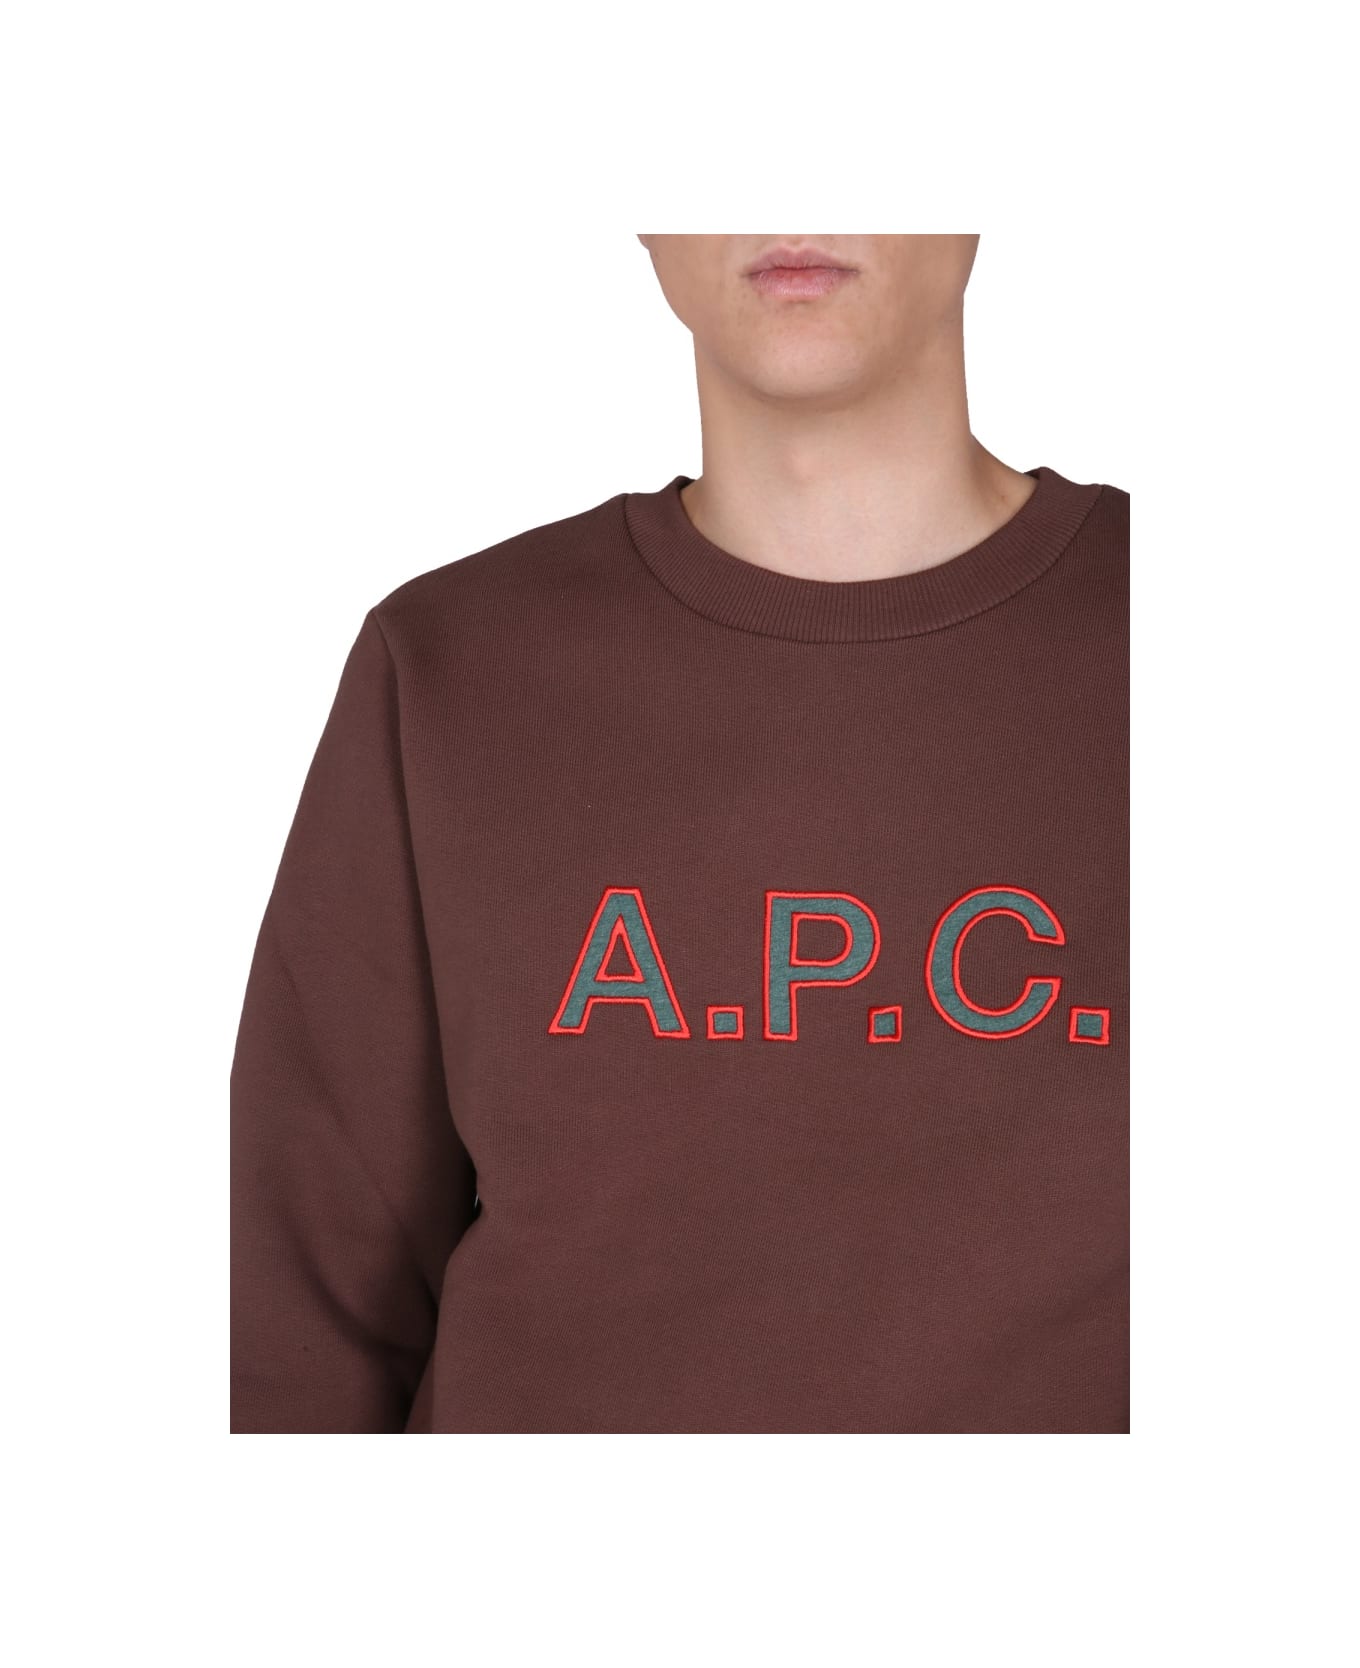 A.P.C. Sweatshirt With Embroidered Logo - BROWN